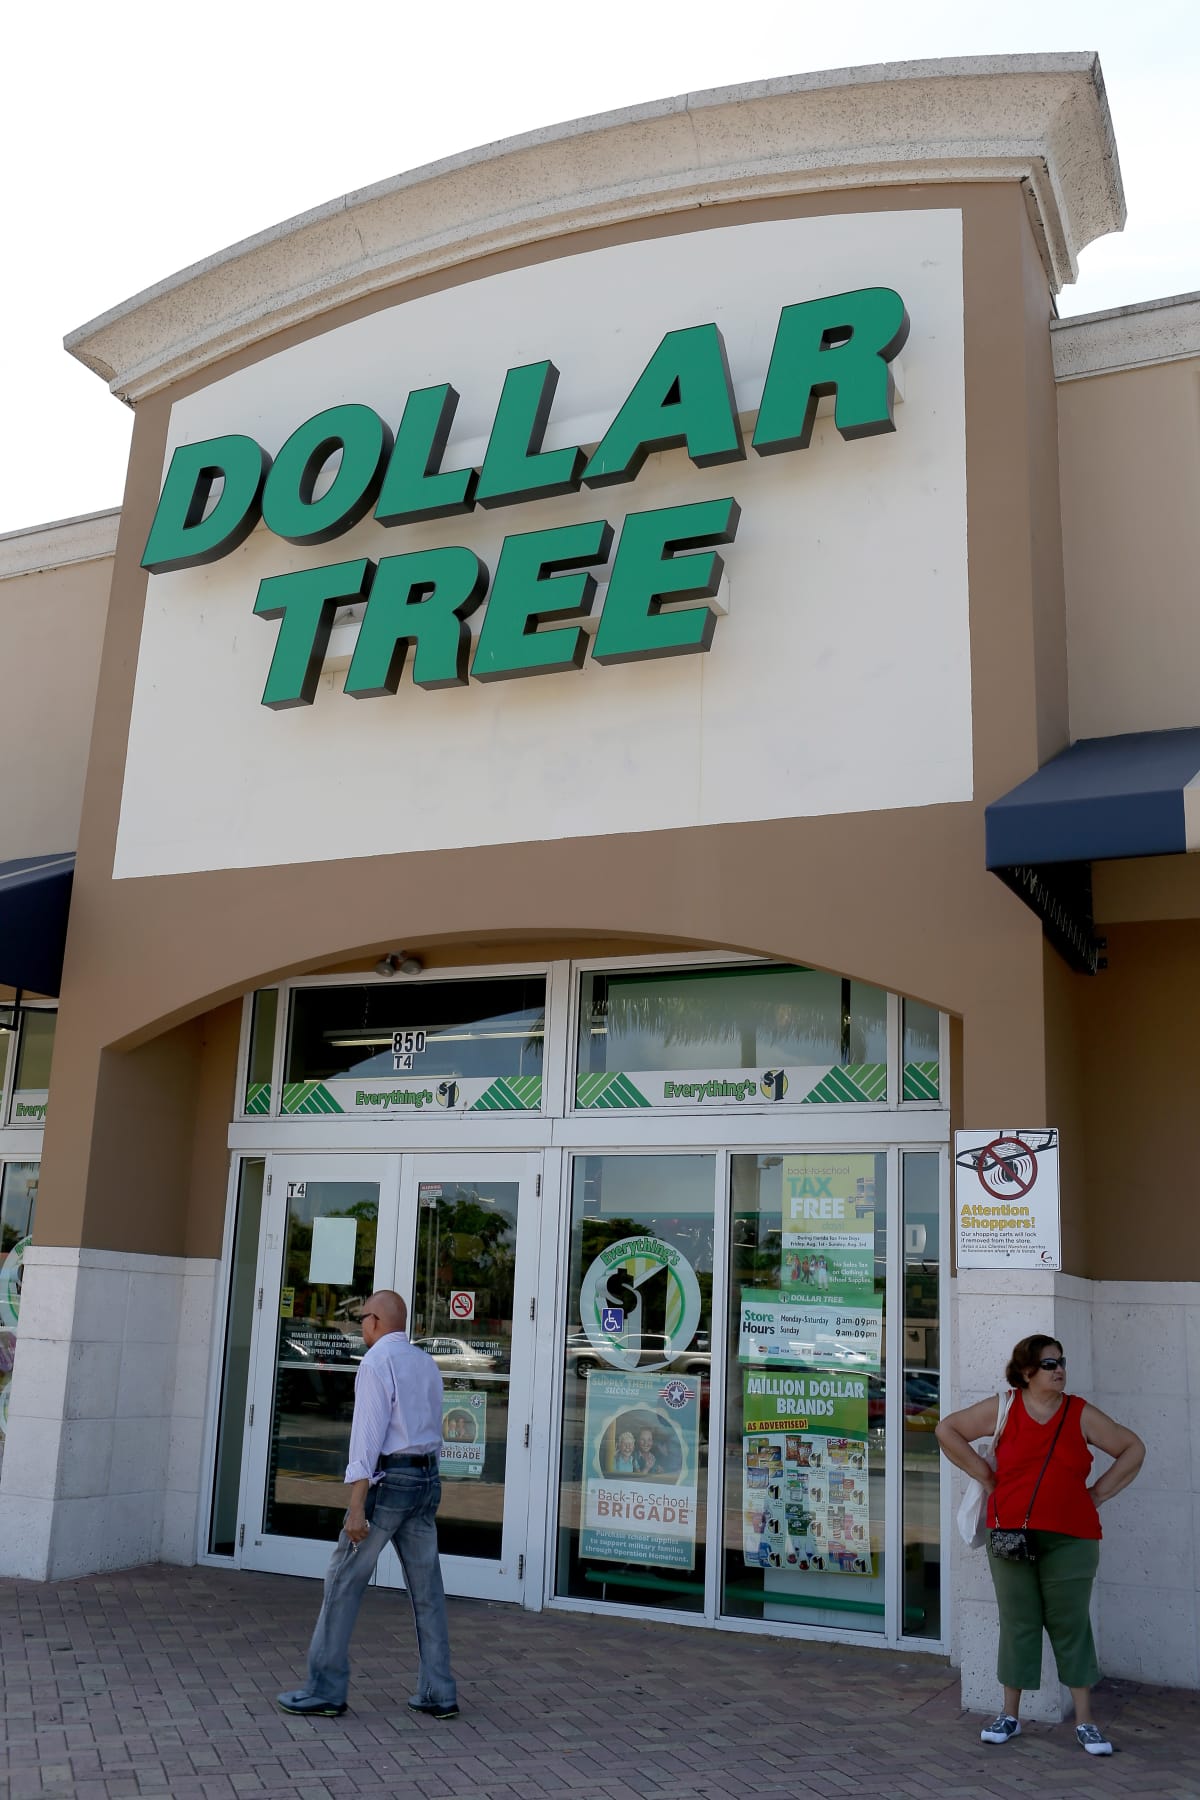 A Dollar Tree store is seen on July 28, 2014 in Miami, Florida. Dollar Tree announced it will buy Family Dollar Stores for about $8.5 billion in cash and stock.